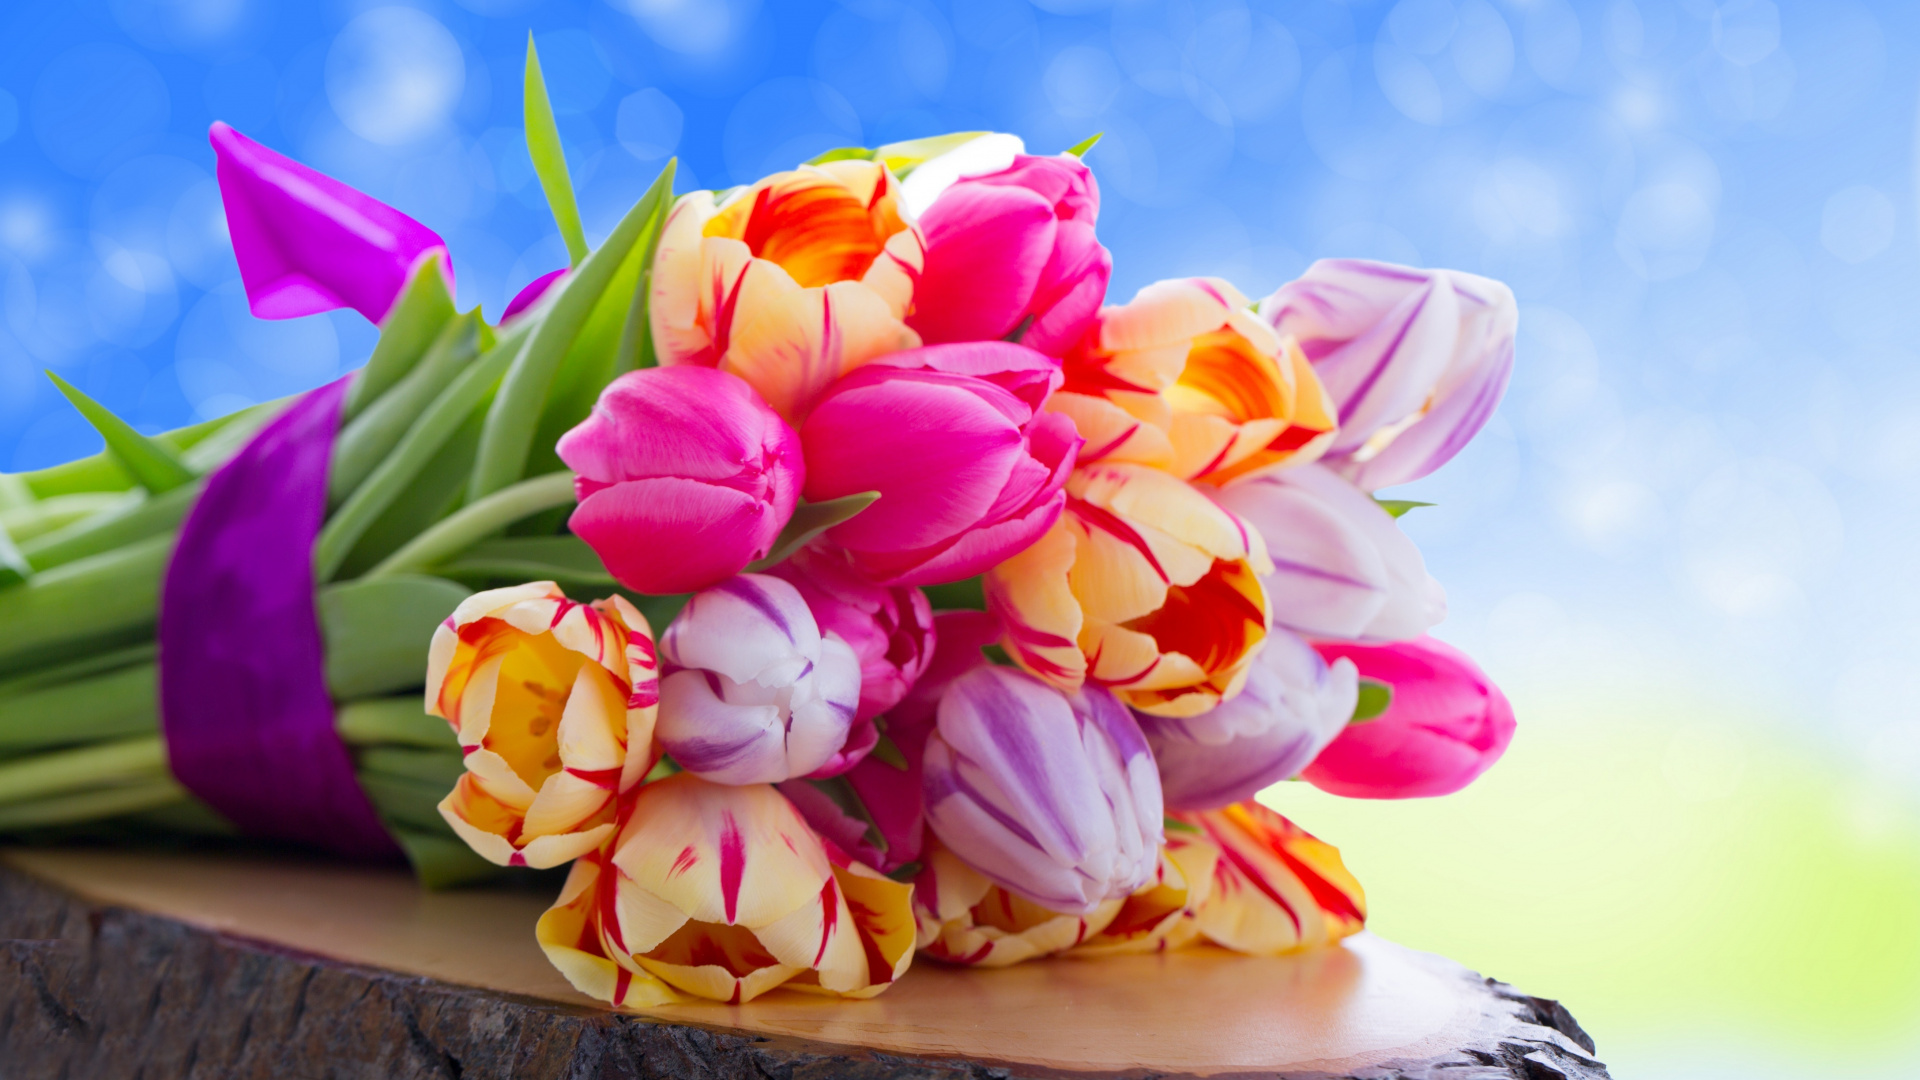 Pink and Yellow Tulips Bouquet. Wallpaper in 1920x1080 Resolution